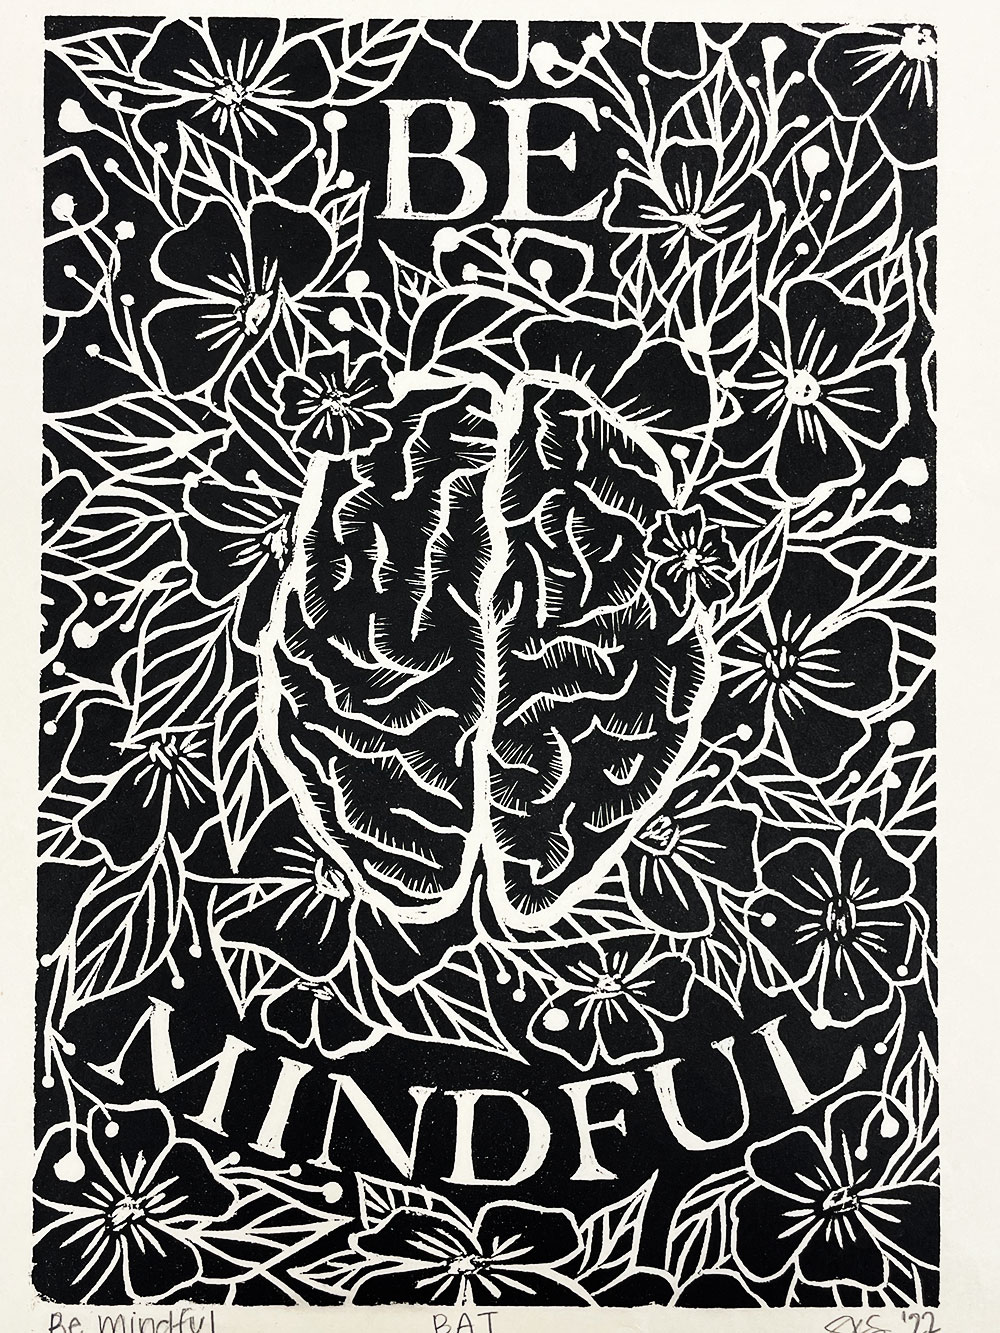 A printed image of a brain surrounded by flowers and leaves, with the words written "Be mindful".